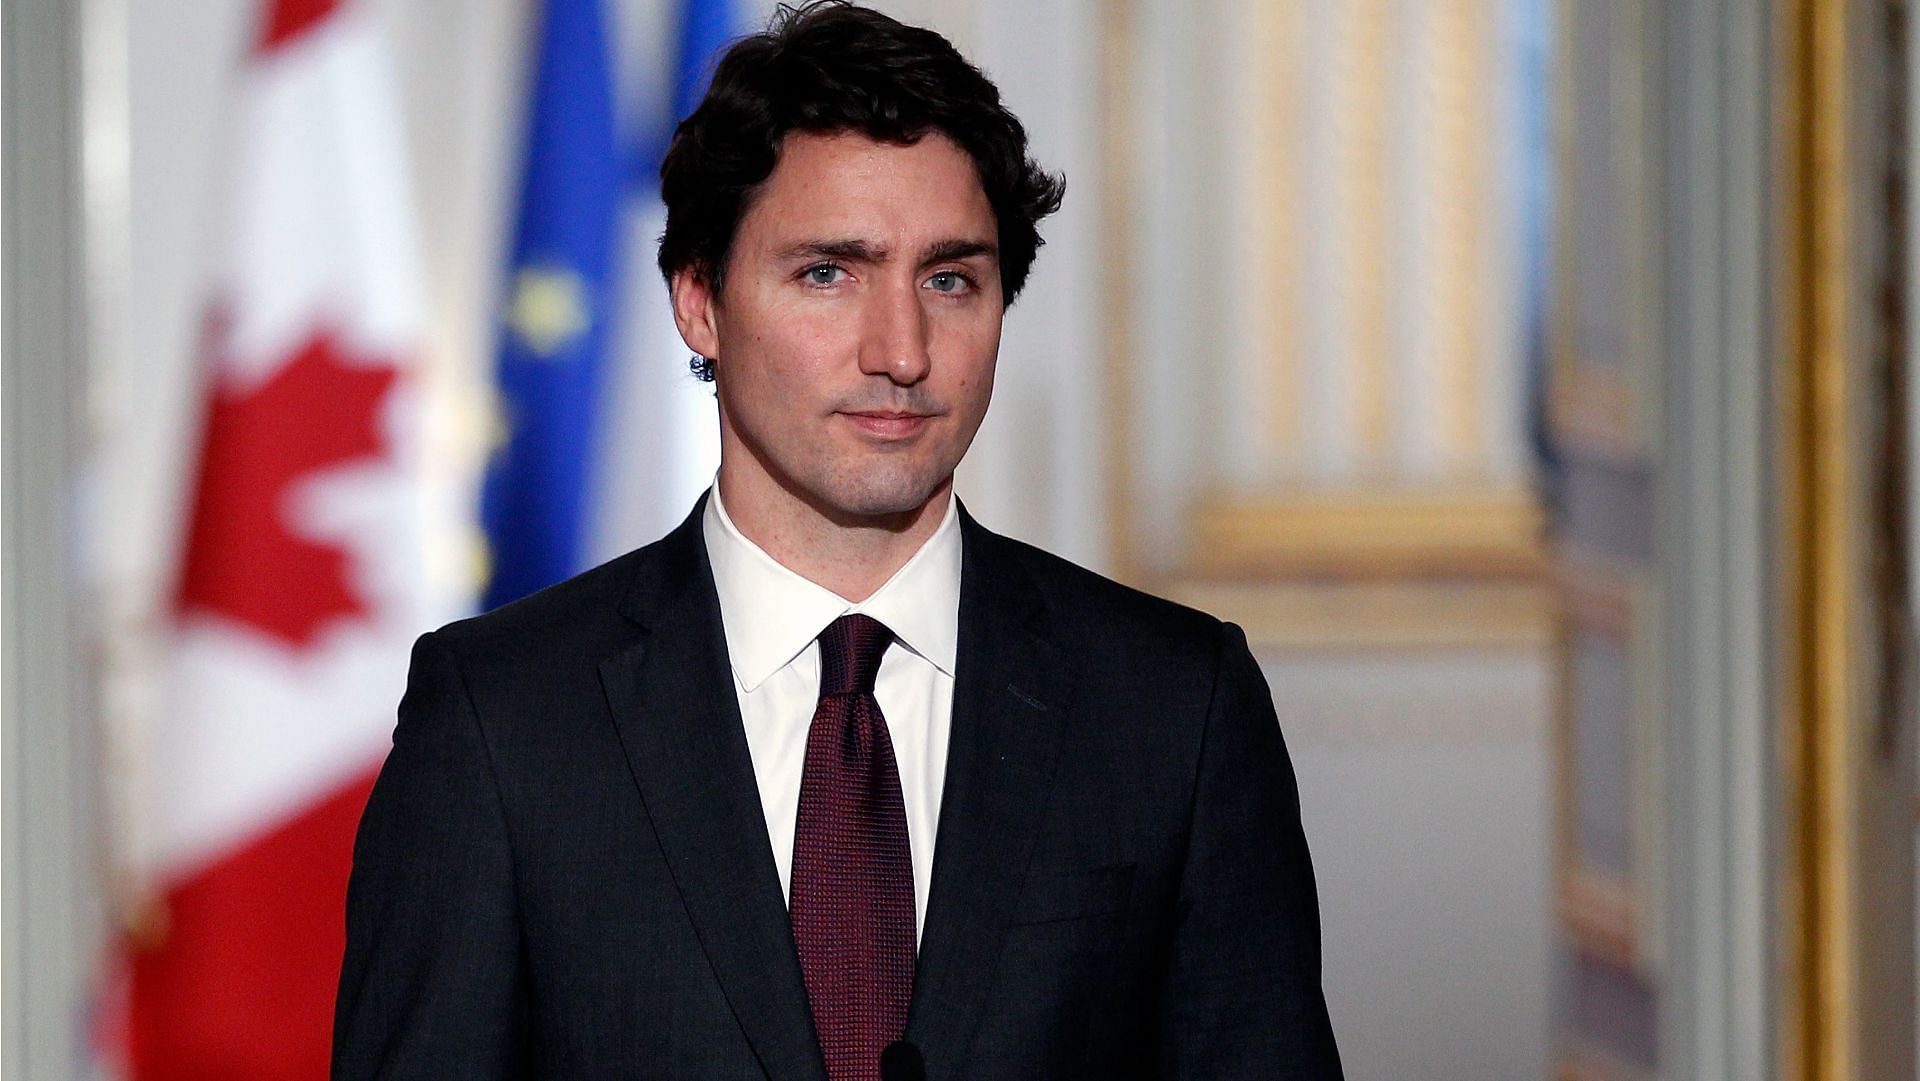 Justin Trudeau and his wife were among the several delegates who attended Queen Elizabeth II